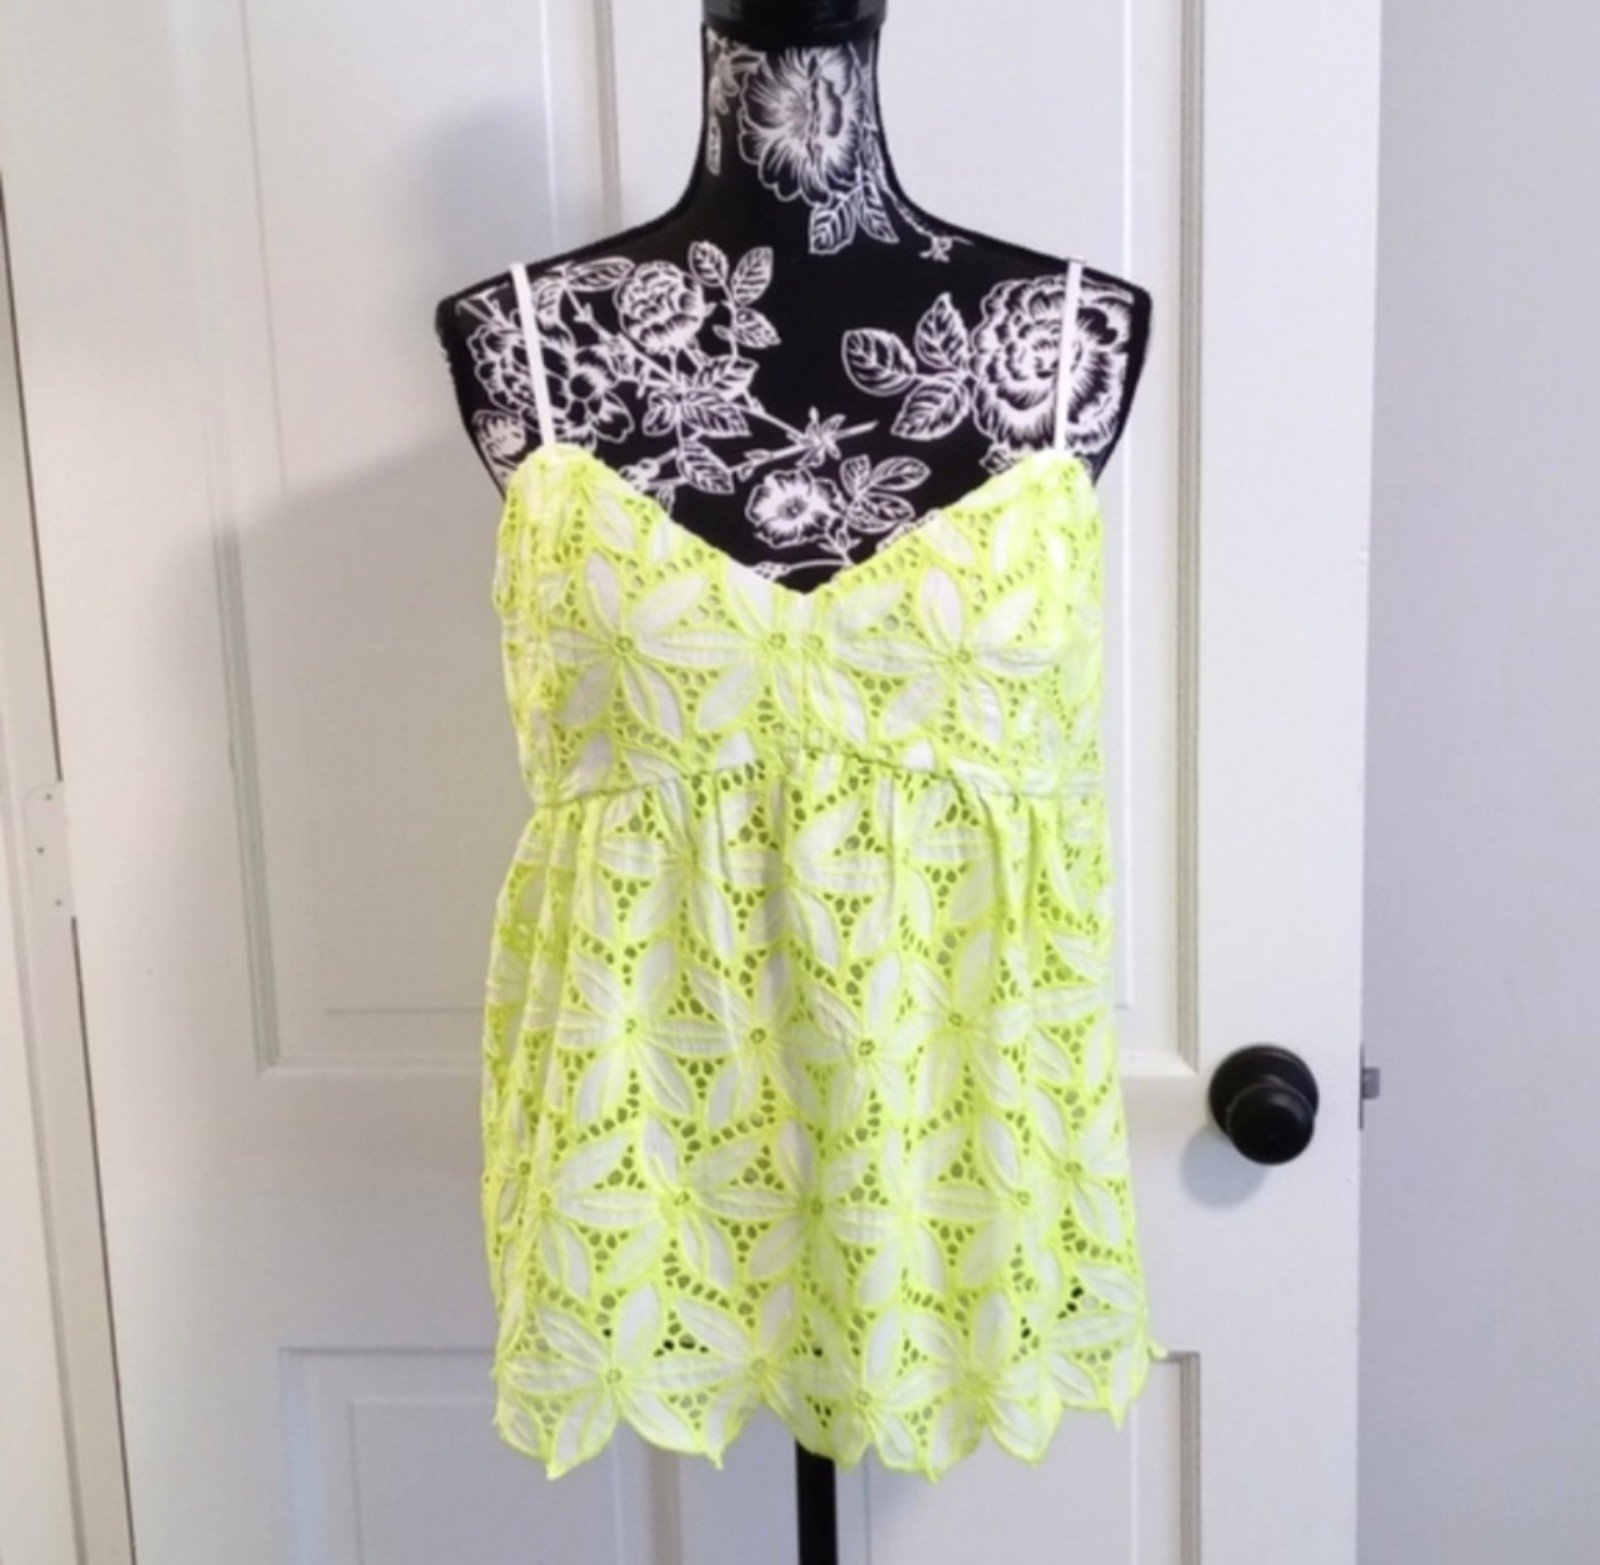 Wholesale price SIZE 14 NWT HTF Lilly Pulitzer - Mellie Top PhUG3VIze well sale